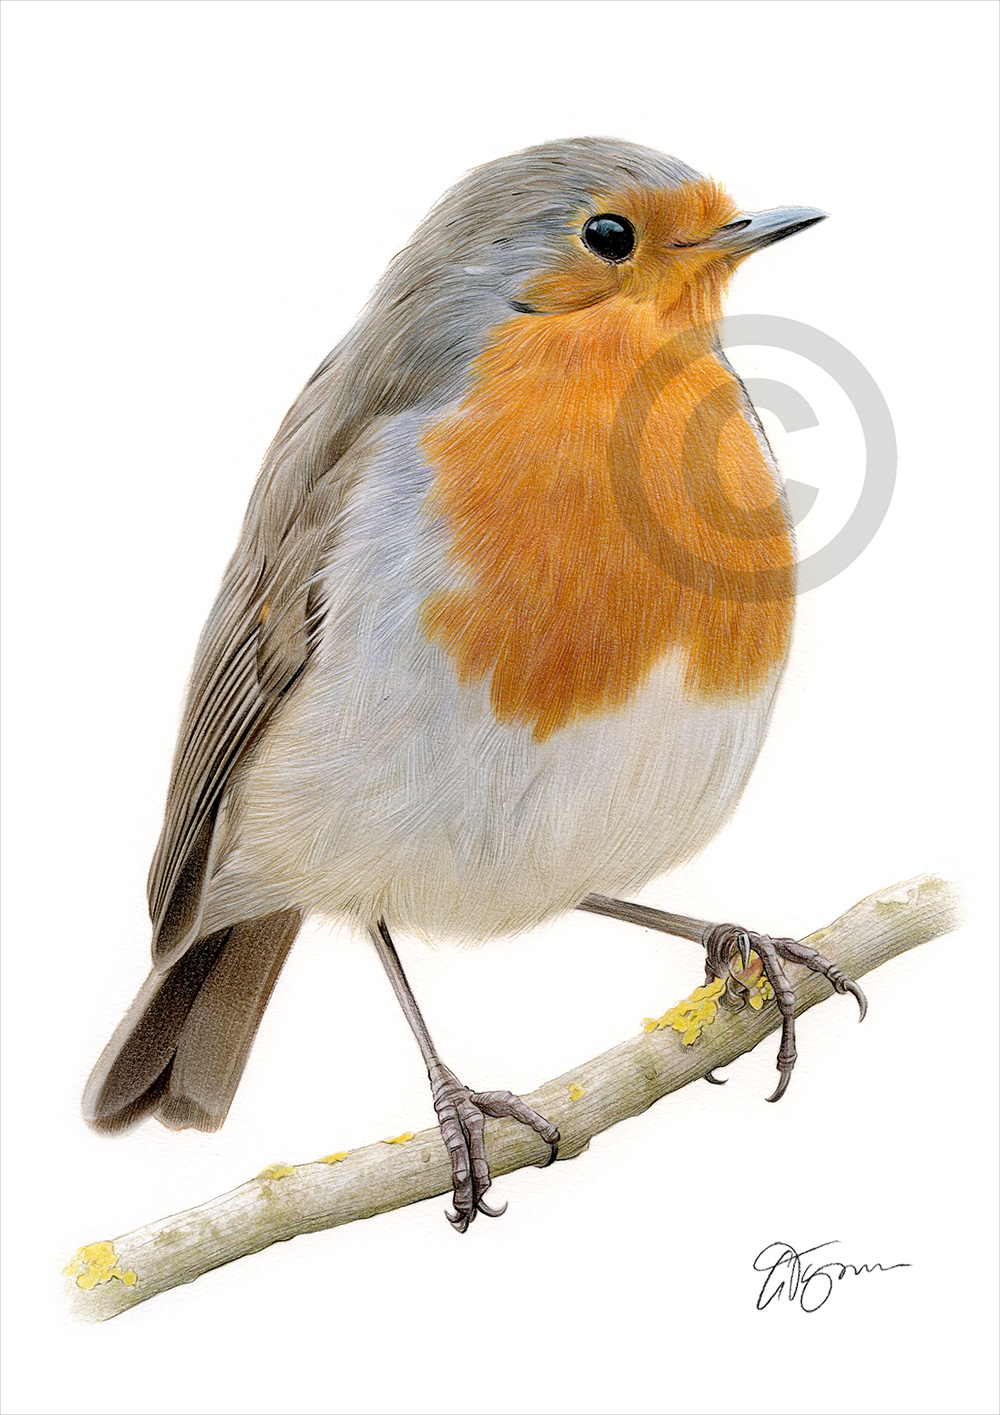 Colour pencil drawing of a robin redbreast by artist Gary Tymon